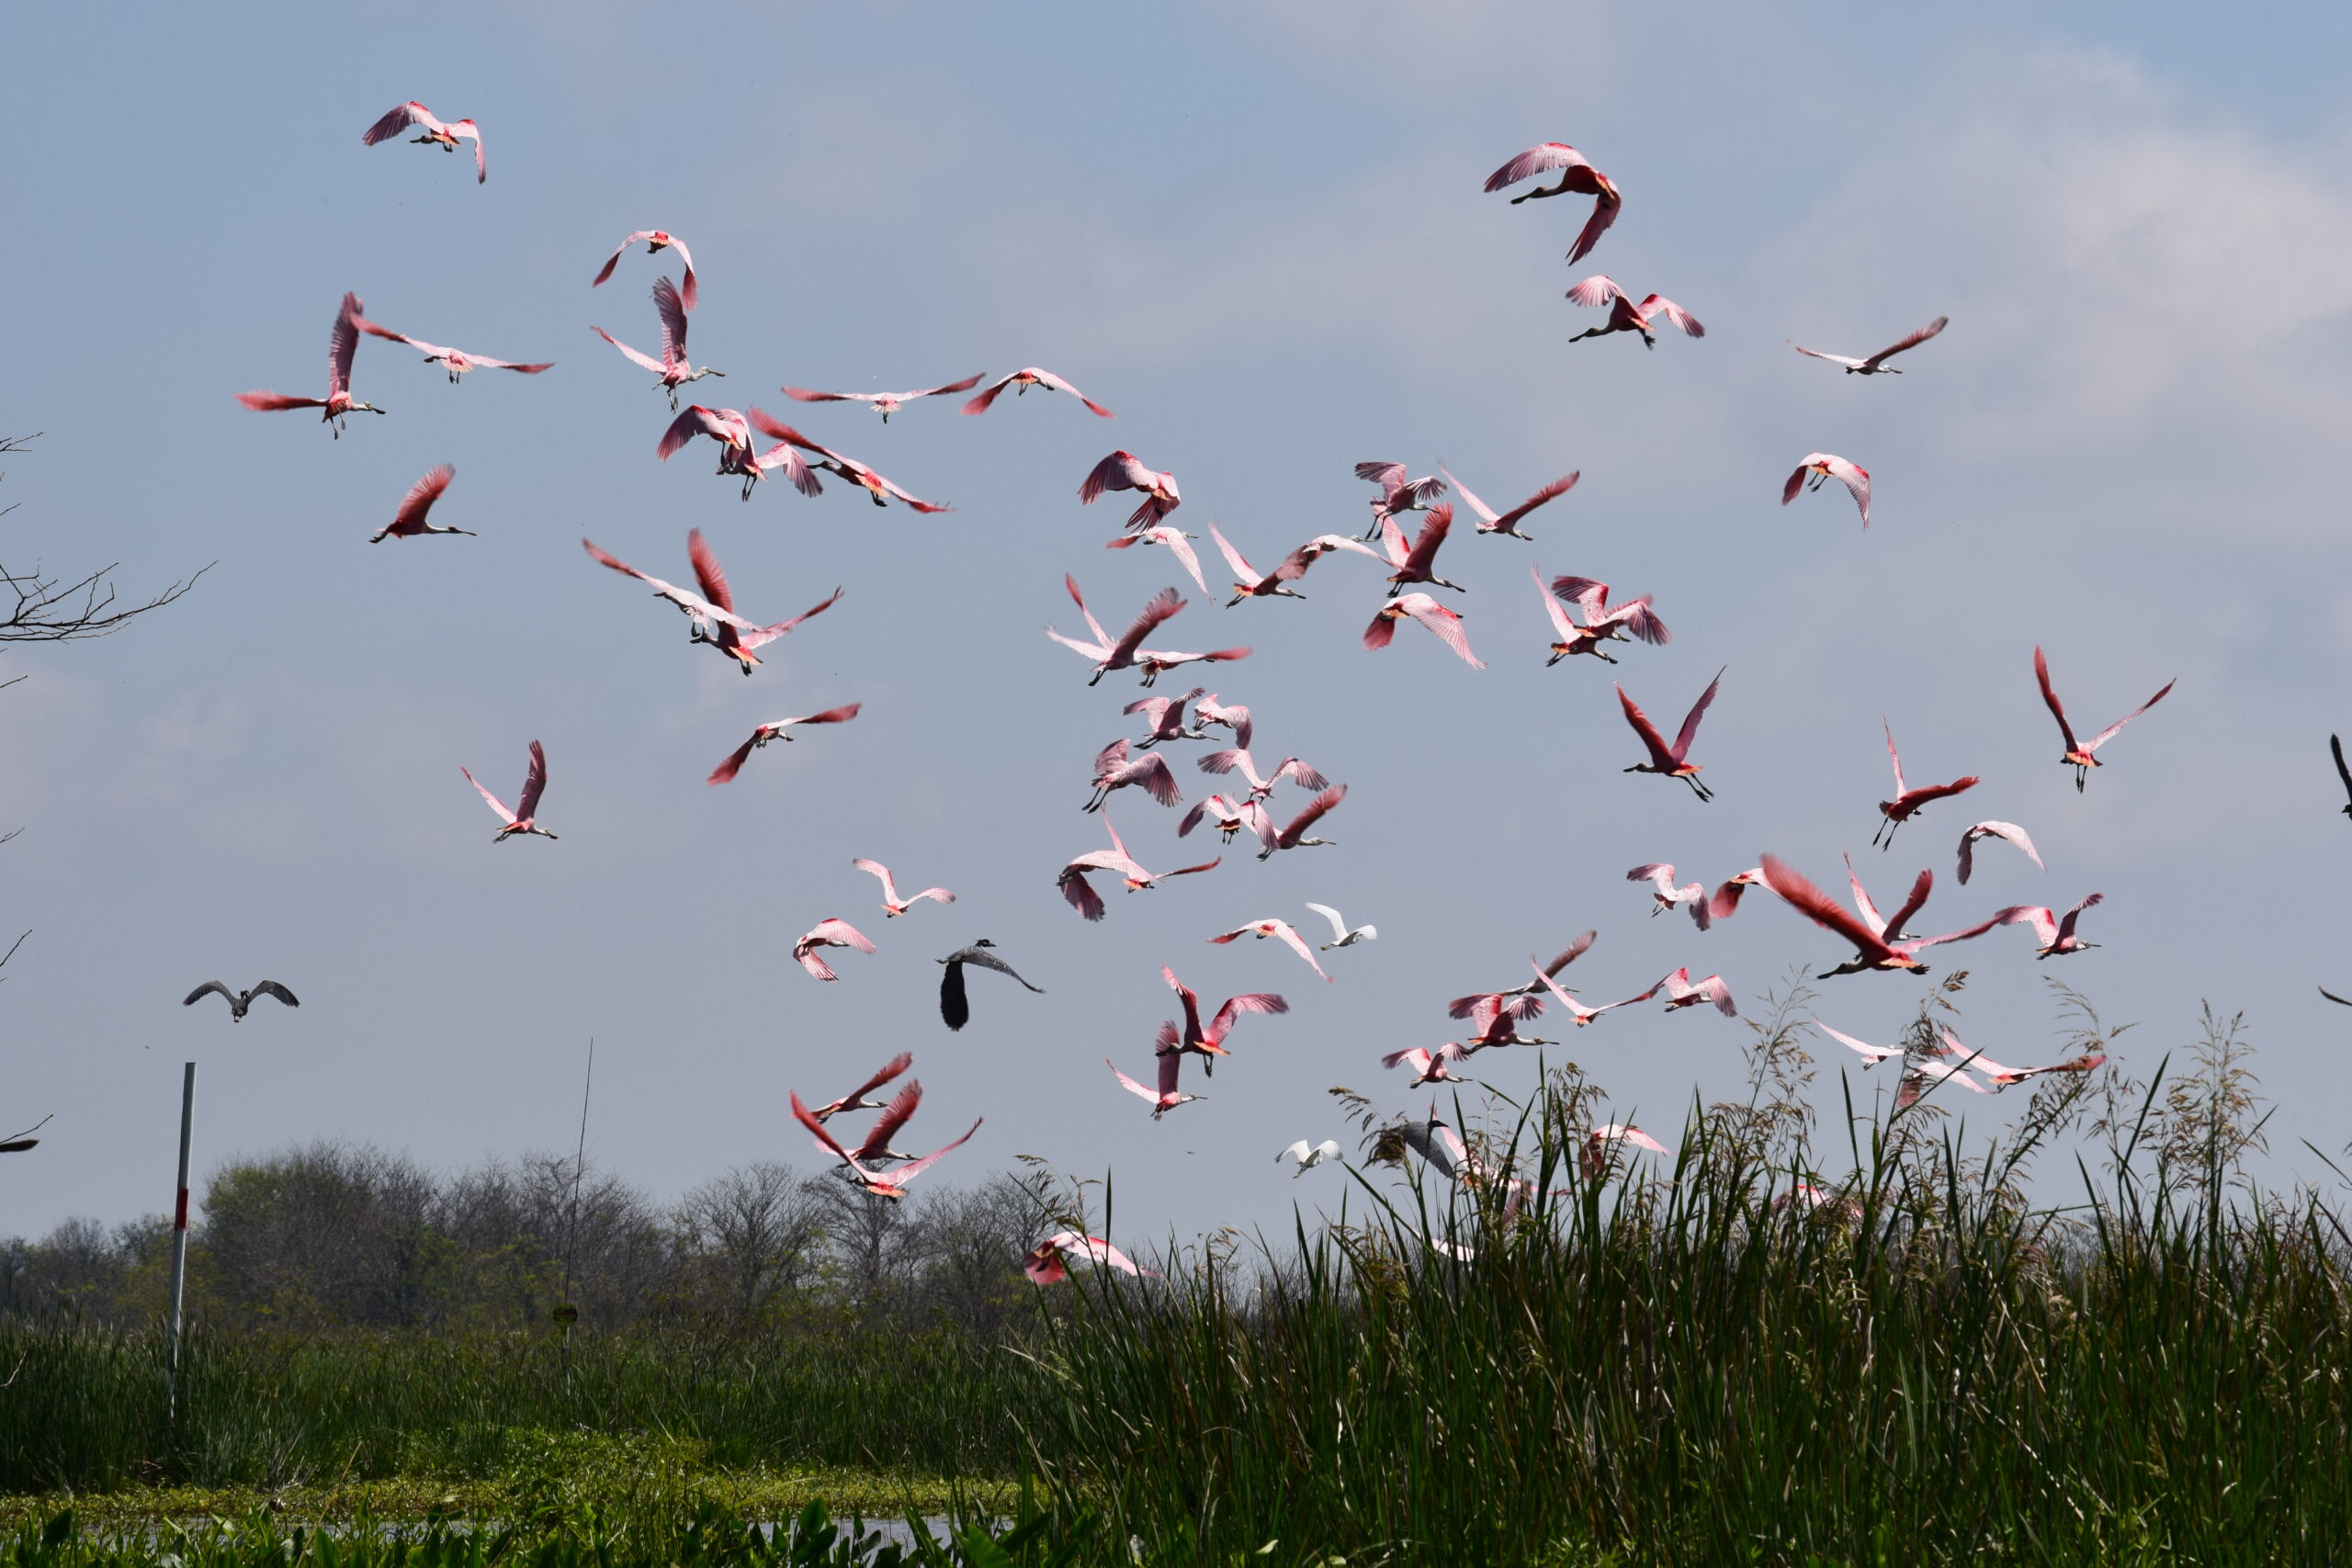 A flock of pink birds fly over marshland.